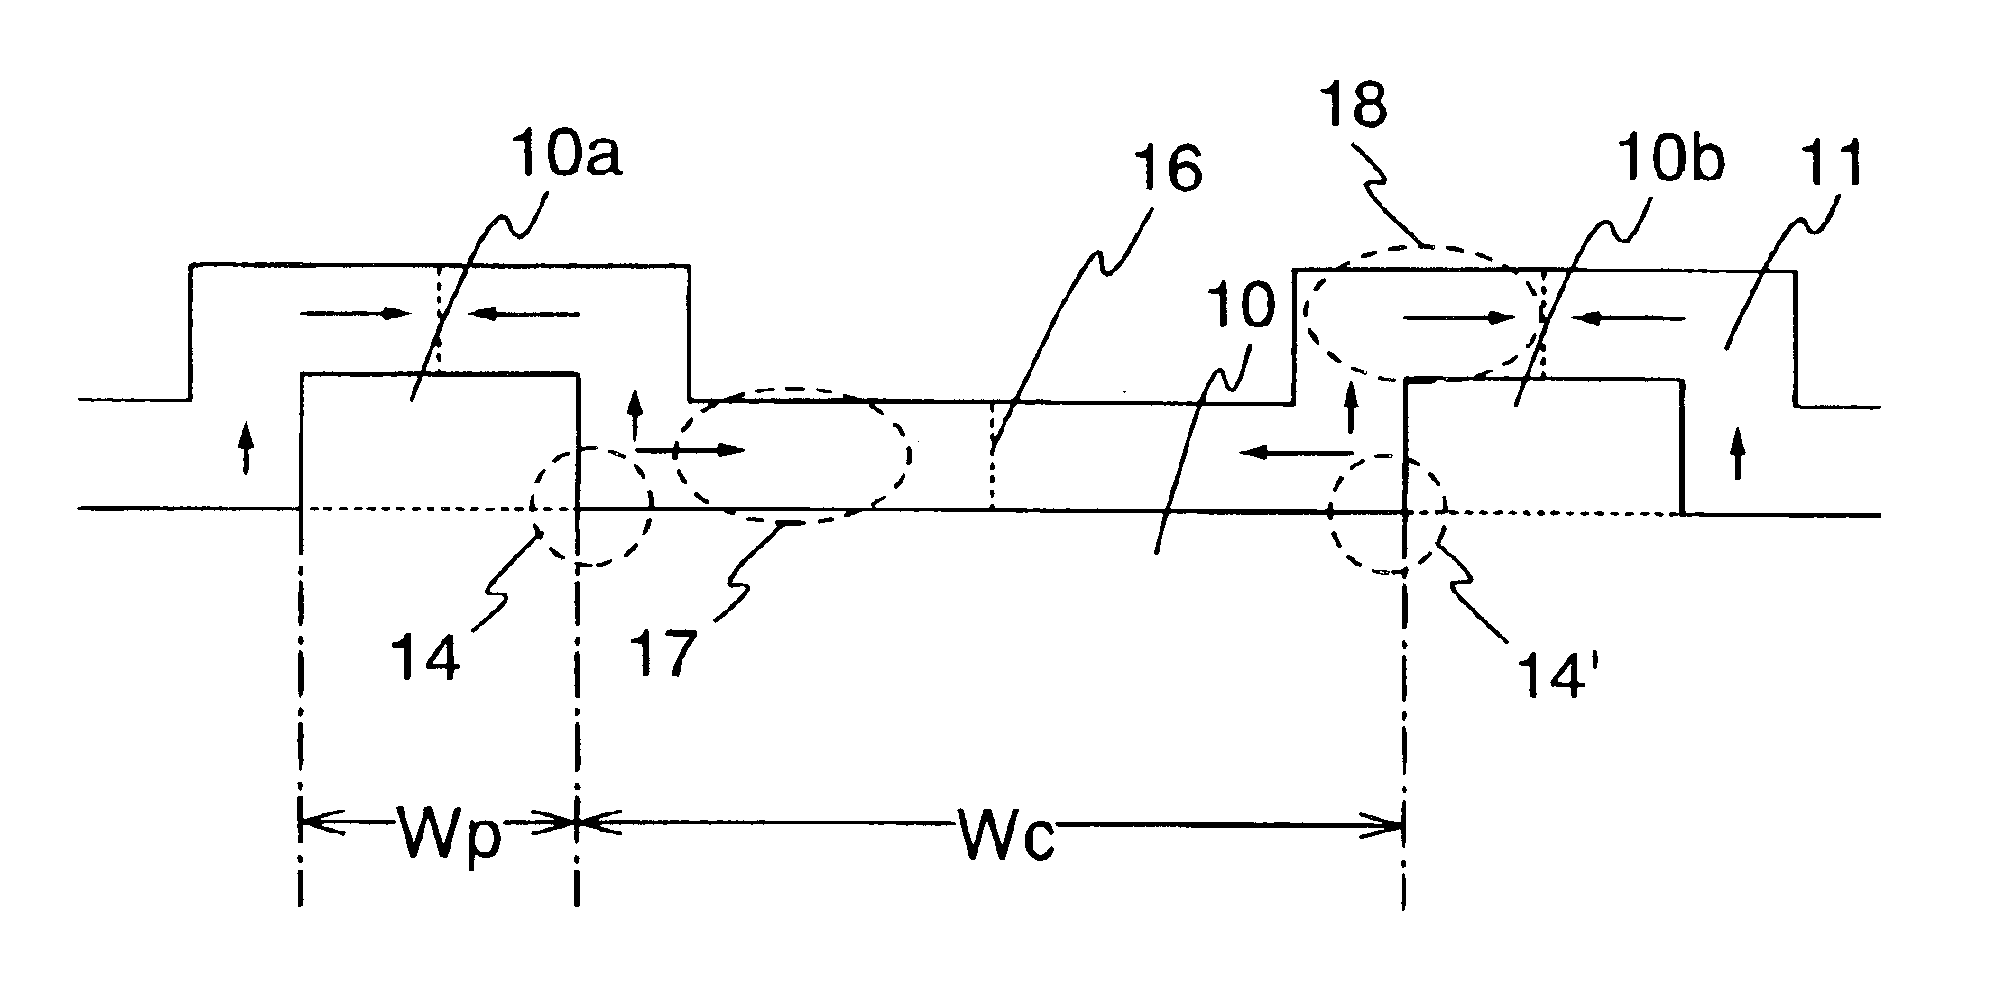 Semiconductor device formed over a surface with a depression portion and a projection portion